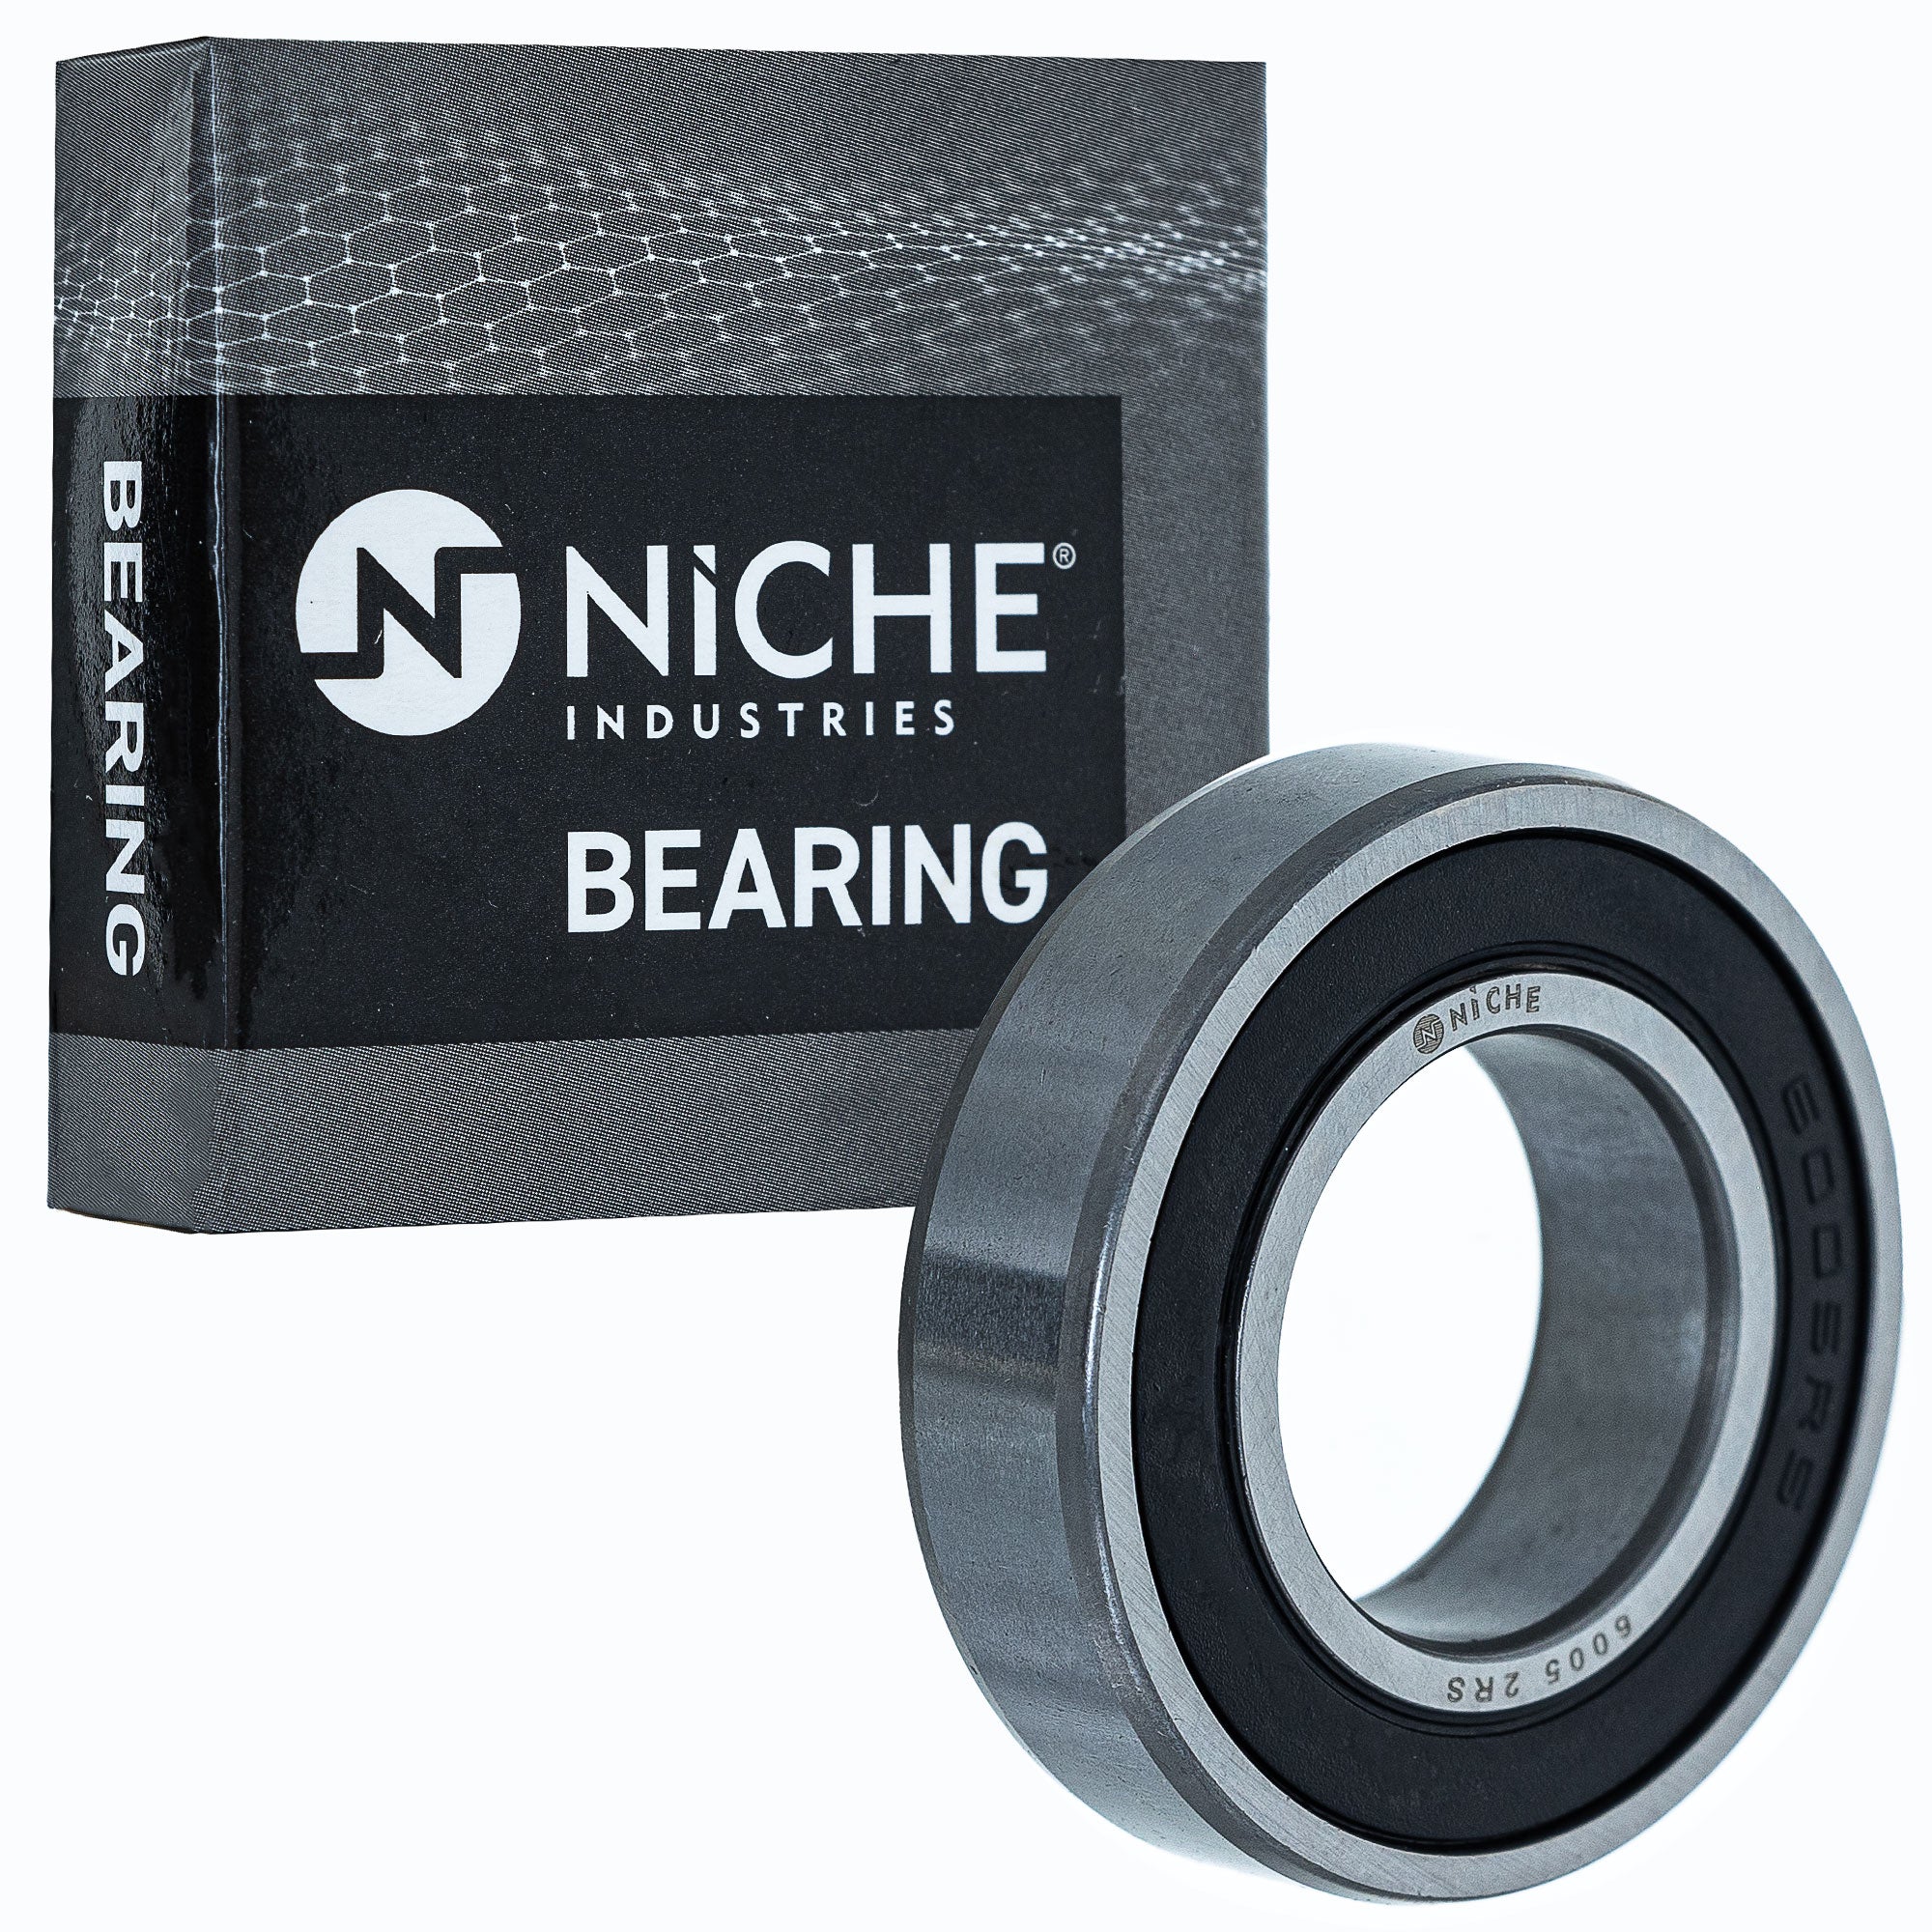 NICHE 519-CBB2234R Bearing & Seal Kit 2-Pack for zOTHER RVT1000R RC51